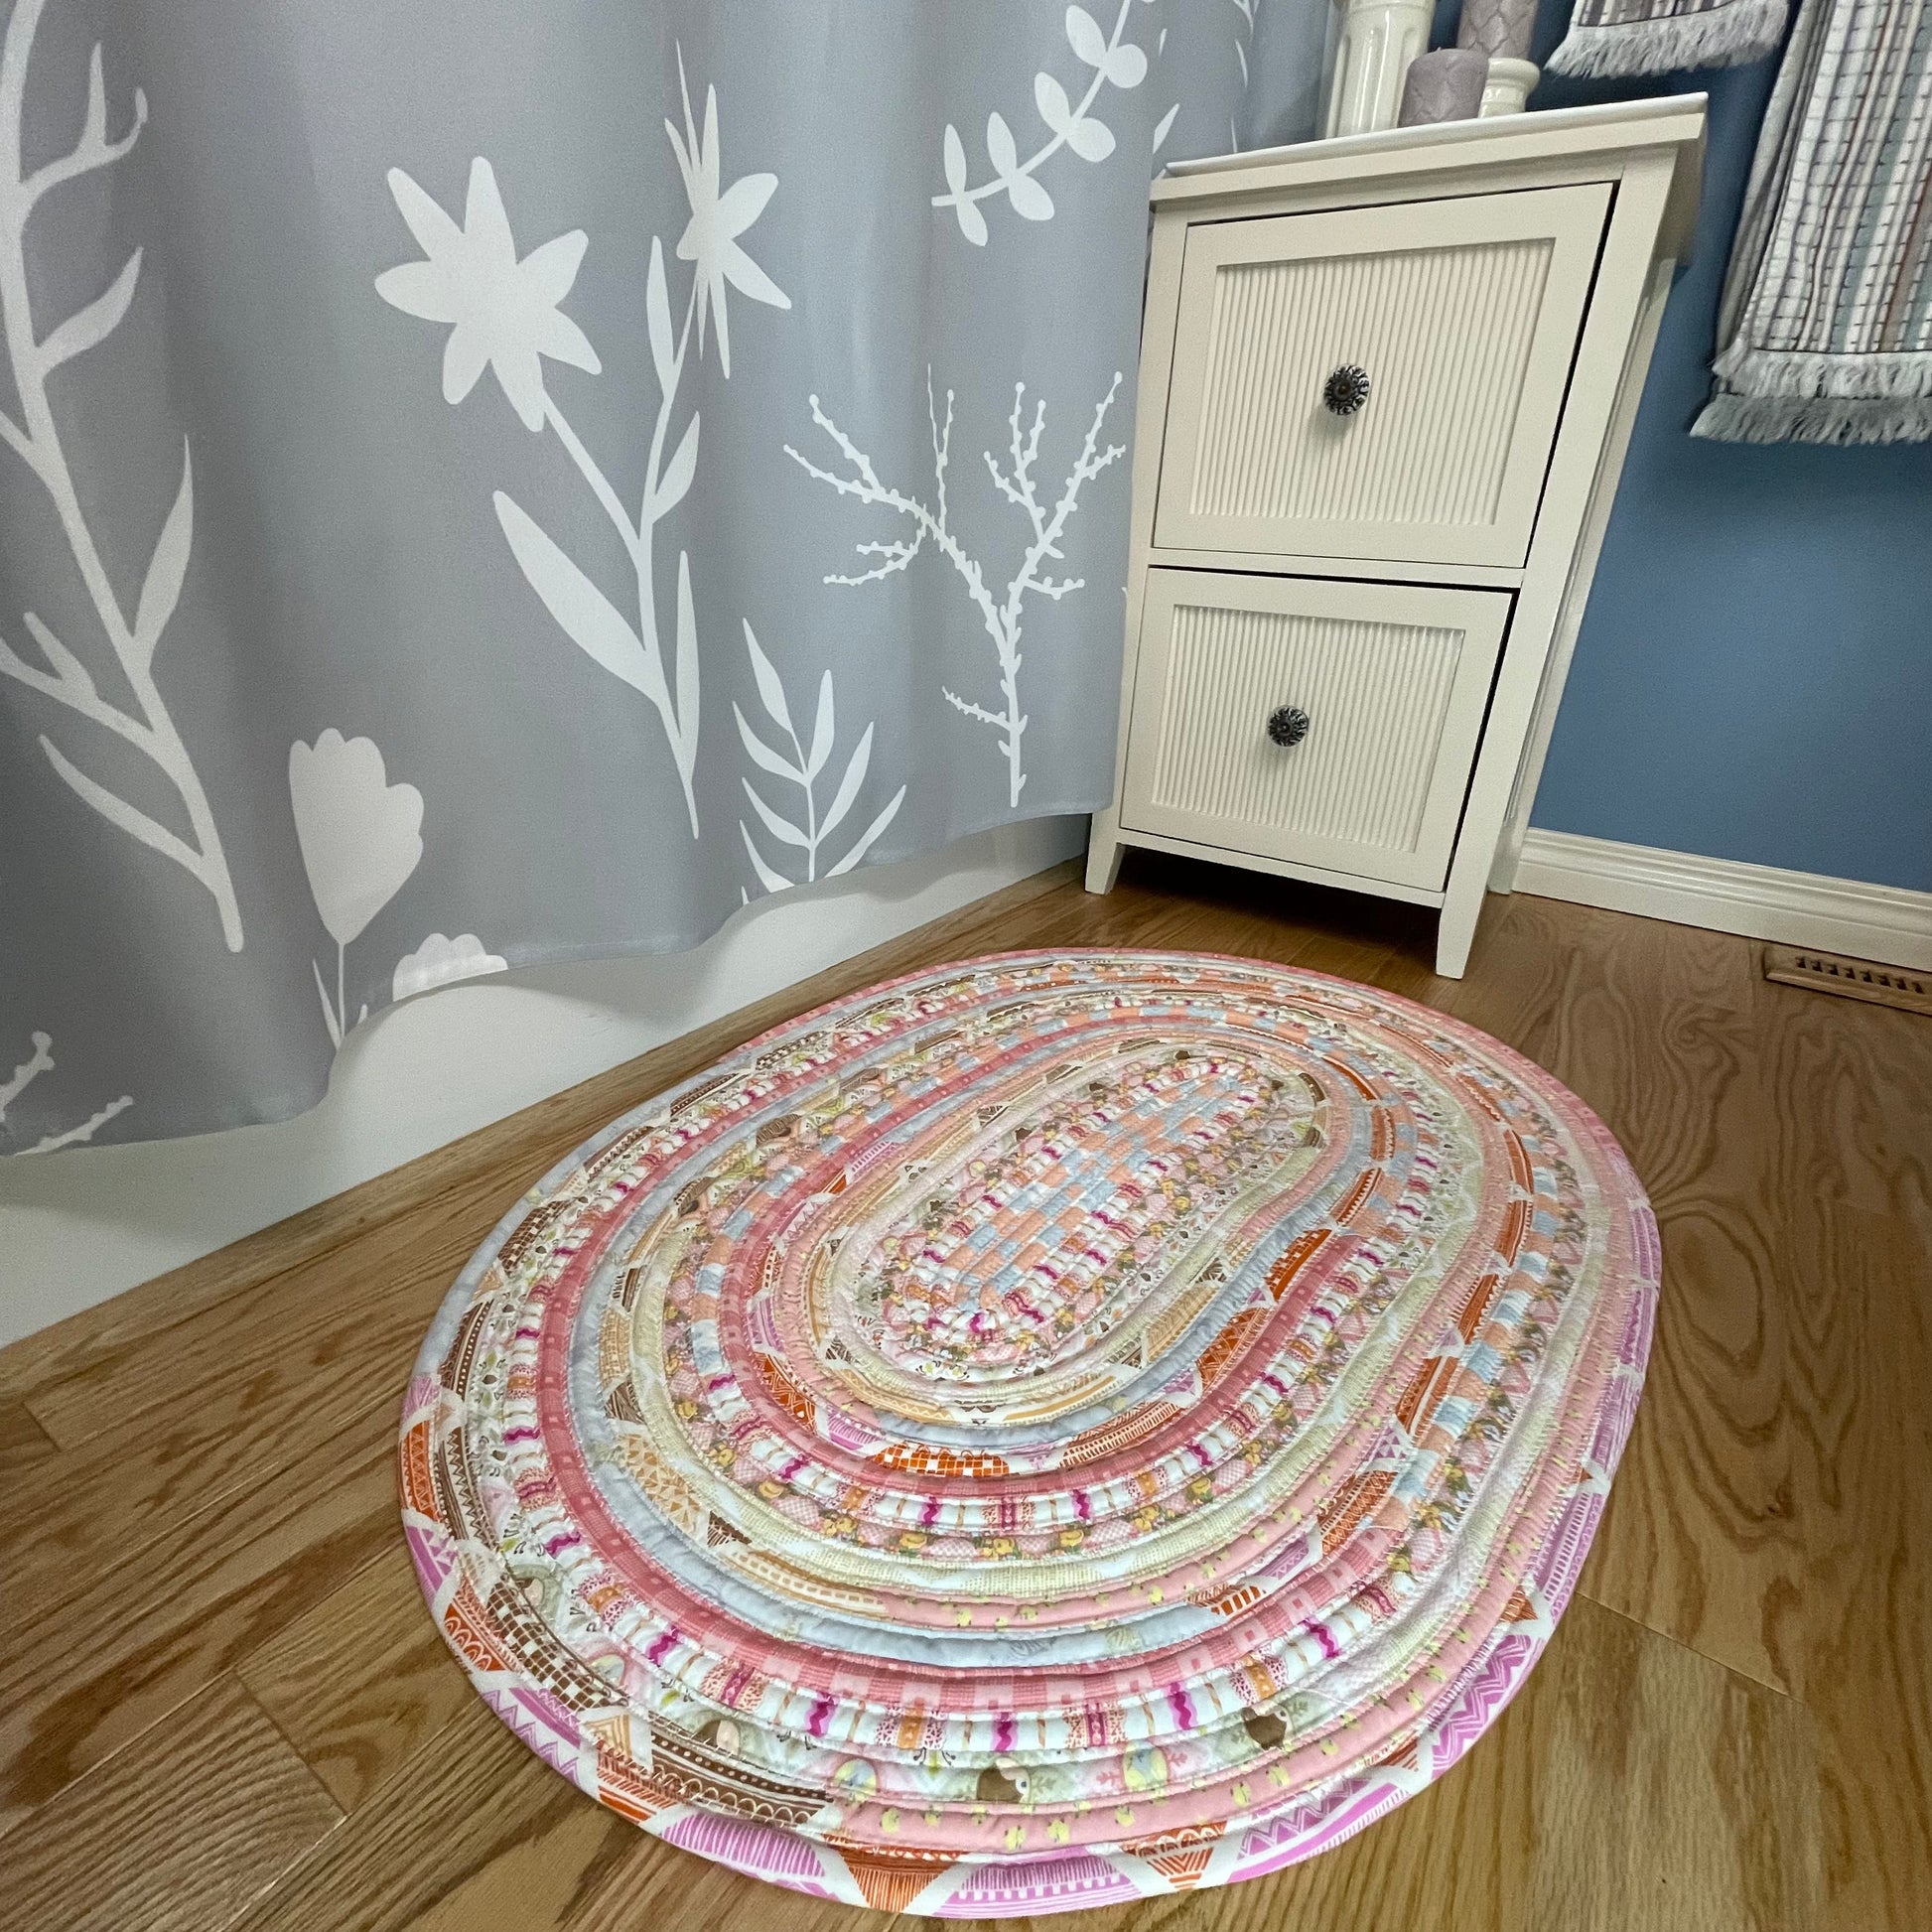 Handmade washable pink cotton Jelly Roll Rug for Kitchen, bedside or bathroom. Made in Canada